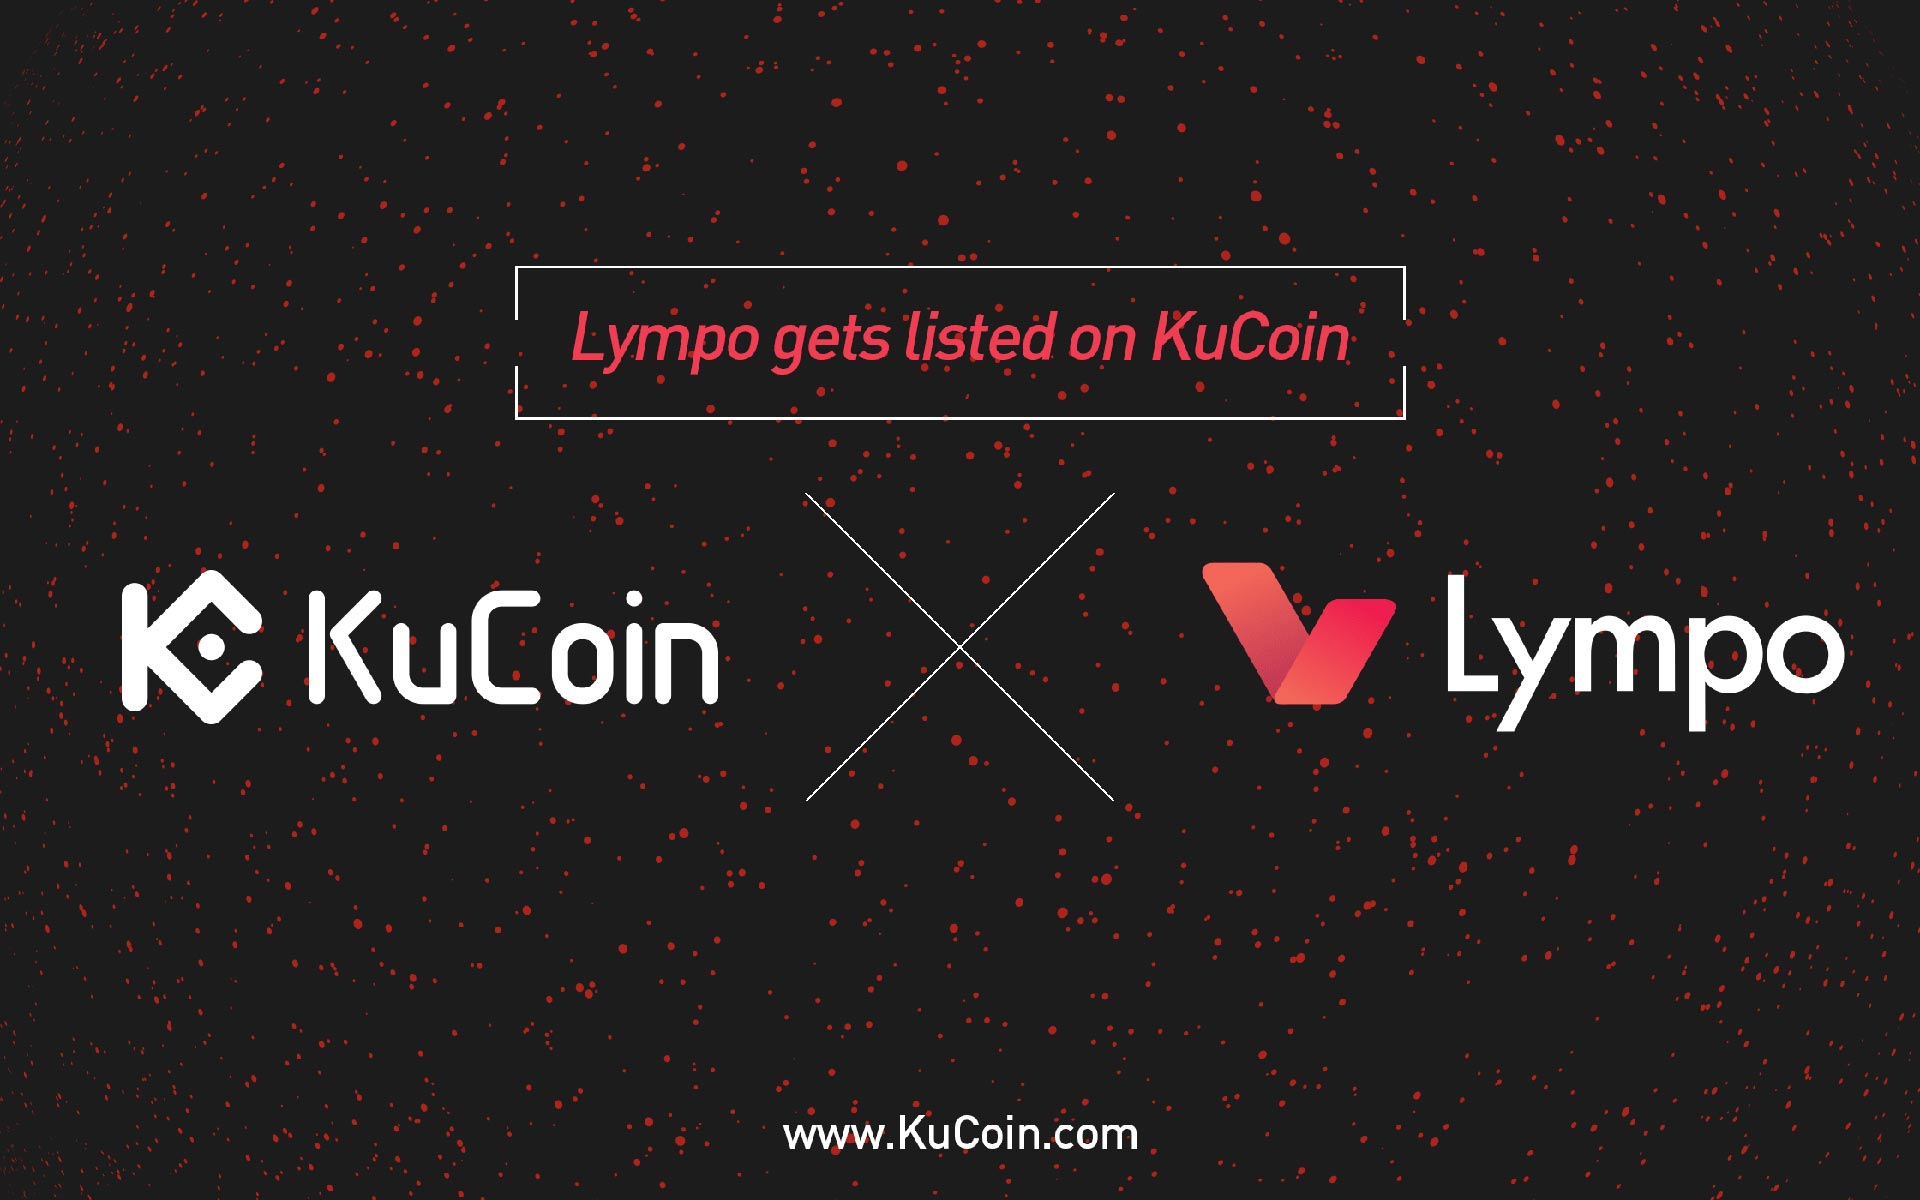 Lympo (LYM) Gets Listed on KuCoin!